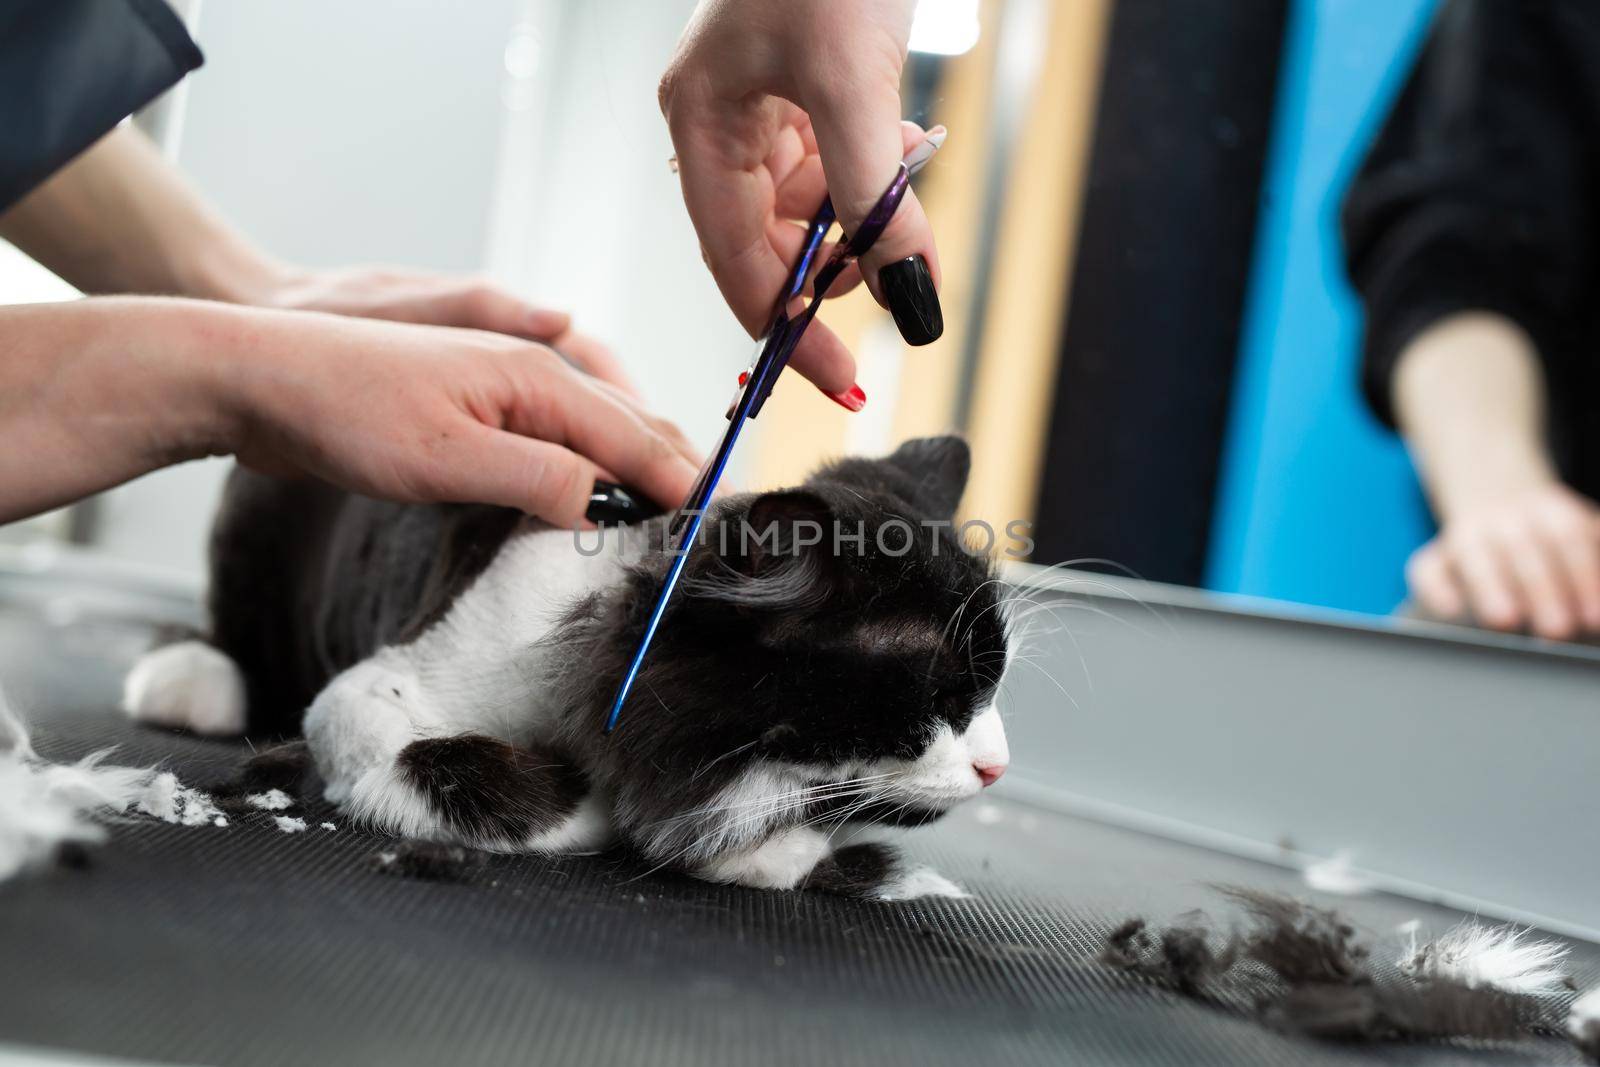 Veterinarian is shearing a cat with scissors in a pet beauty salon. A female Barber shaves a black and white cat. Grooming animals by StudioPeace